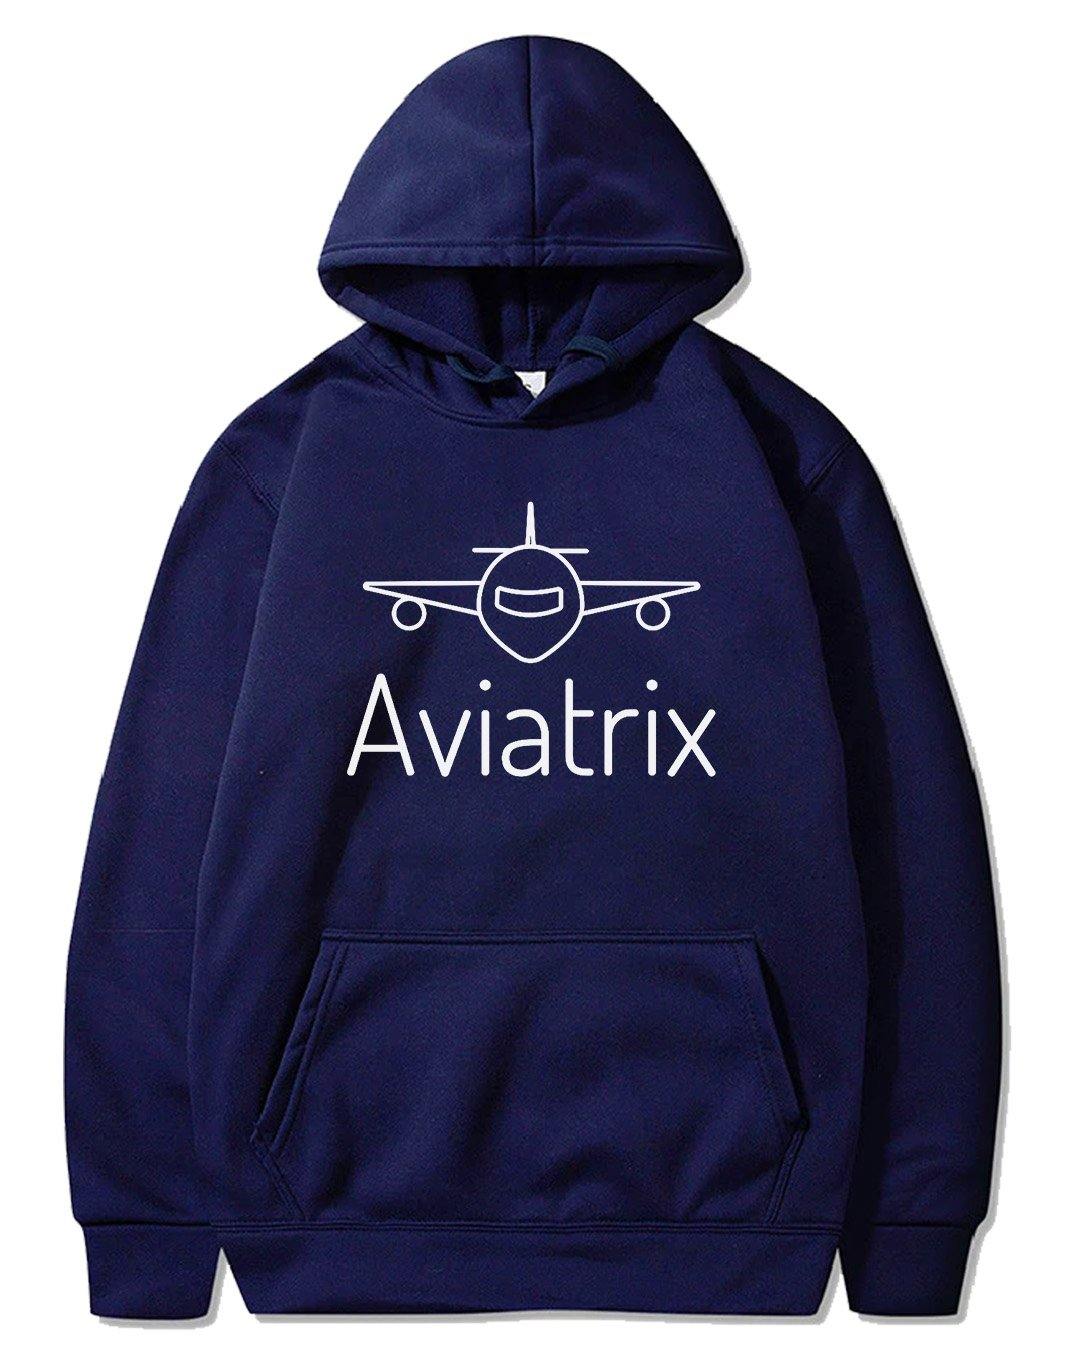 AVIATRIX AND AIRPLANES PULLOVER THE AV8R